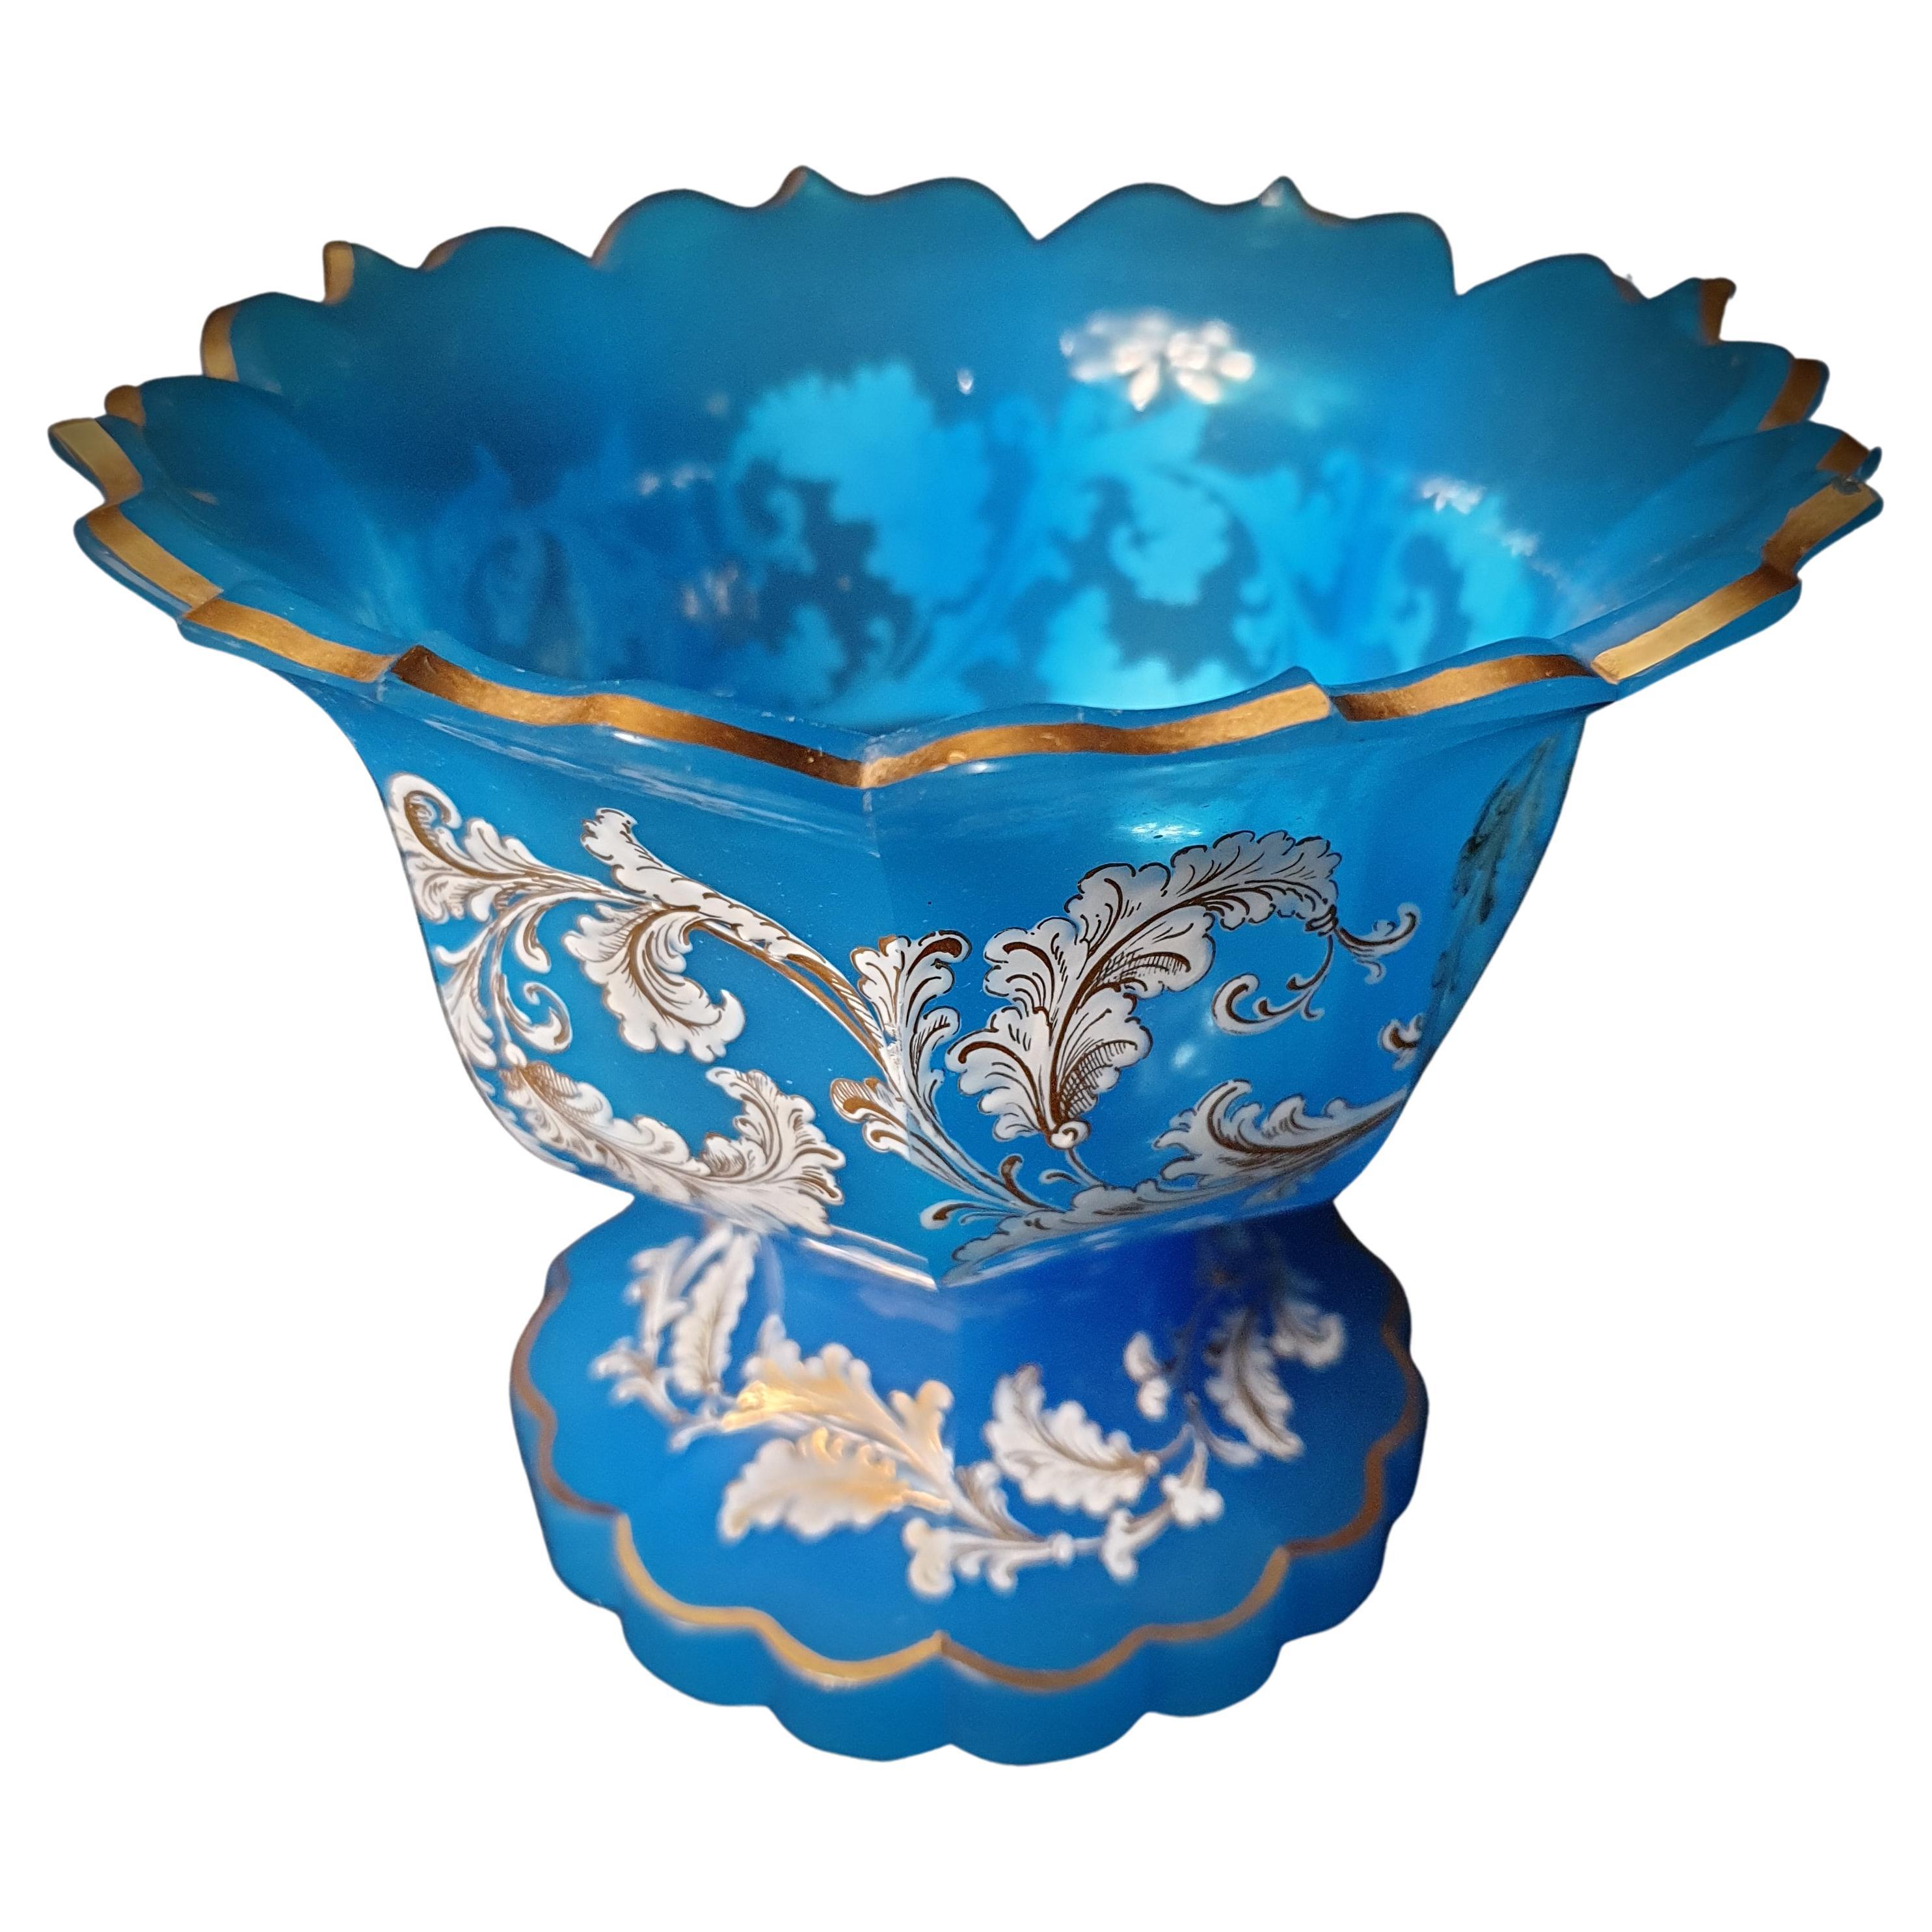 Cut Blue Moser Opaline Glass Serving Dish, Flower Shaped, Gilded and Painted For Sale